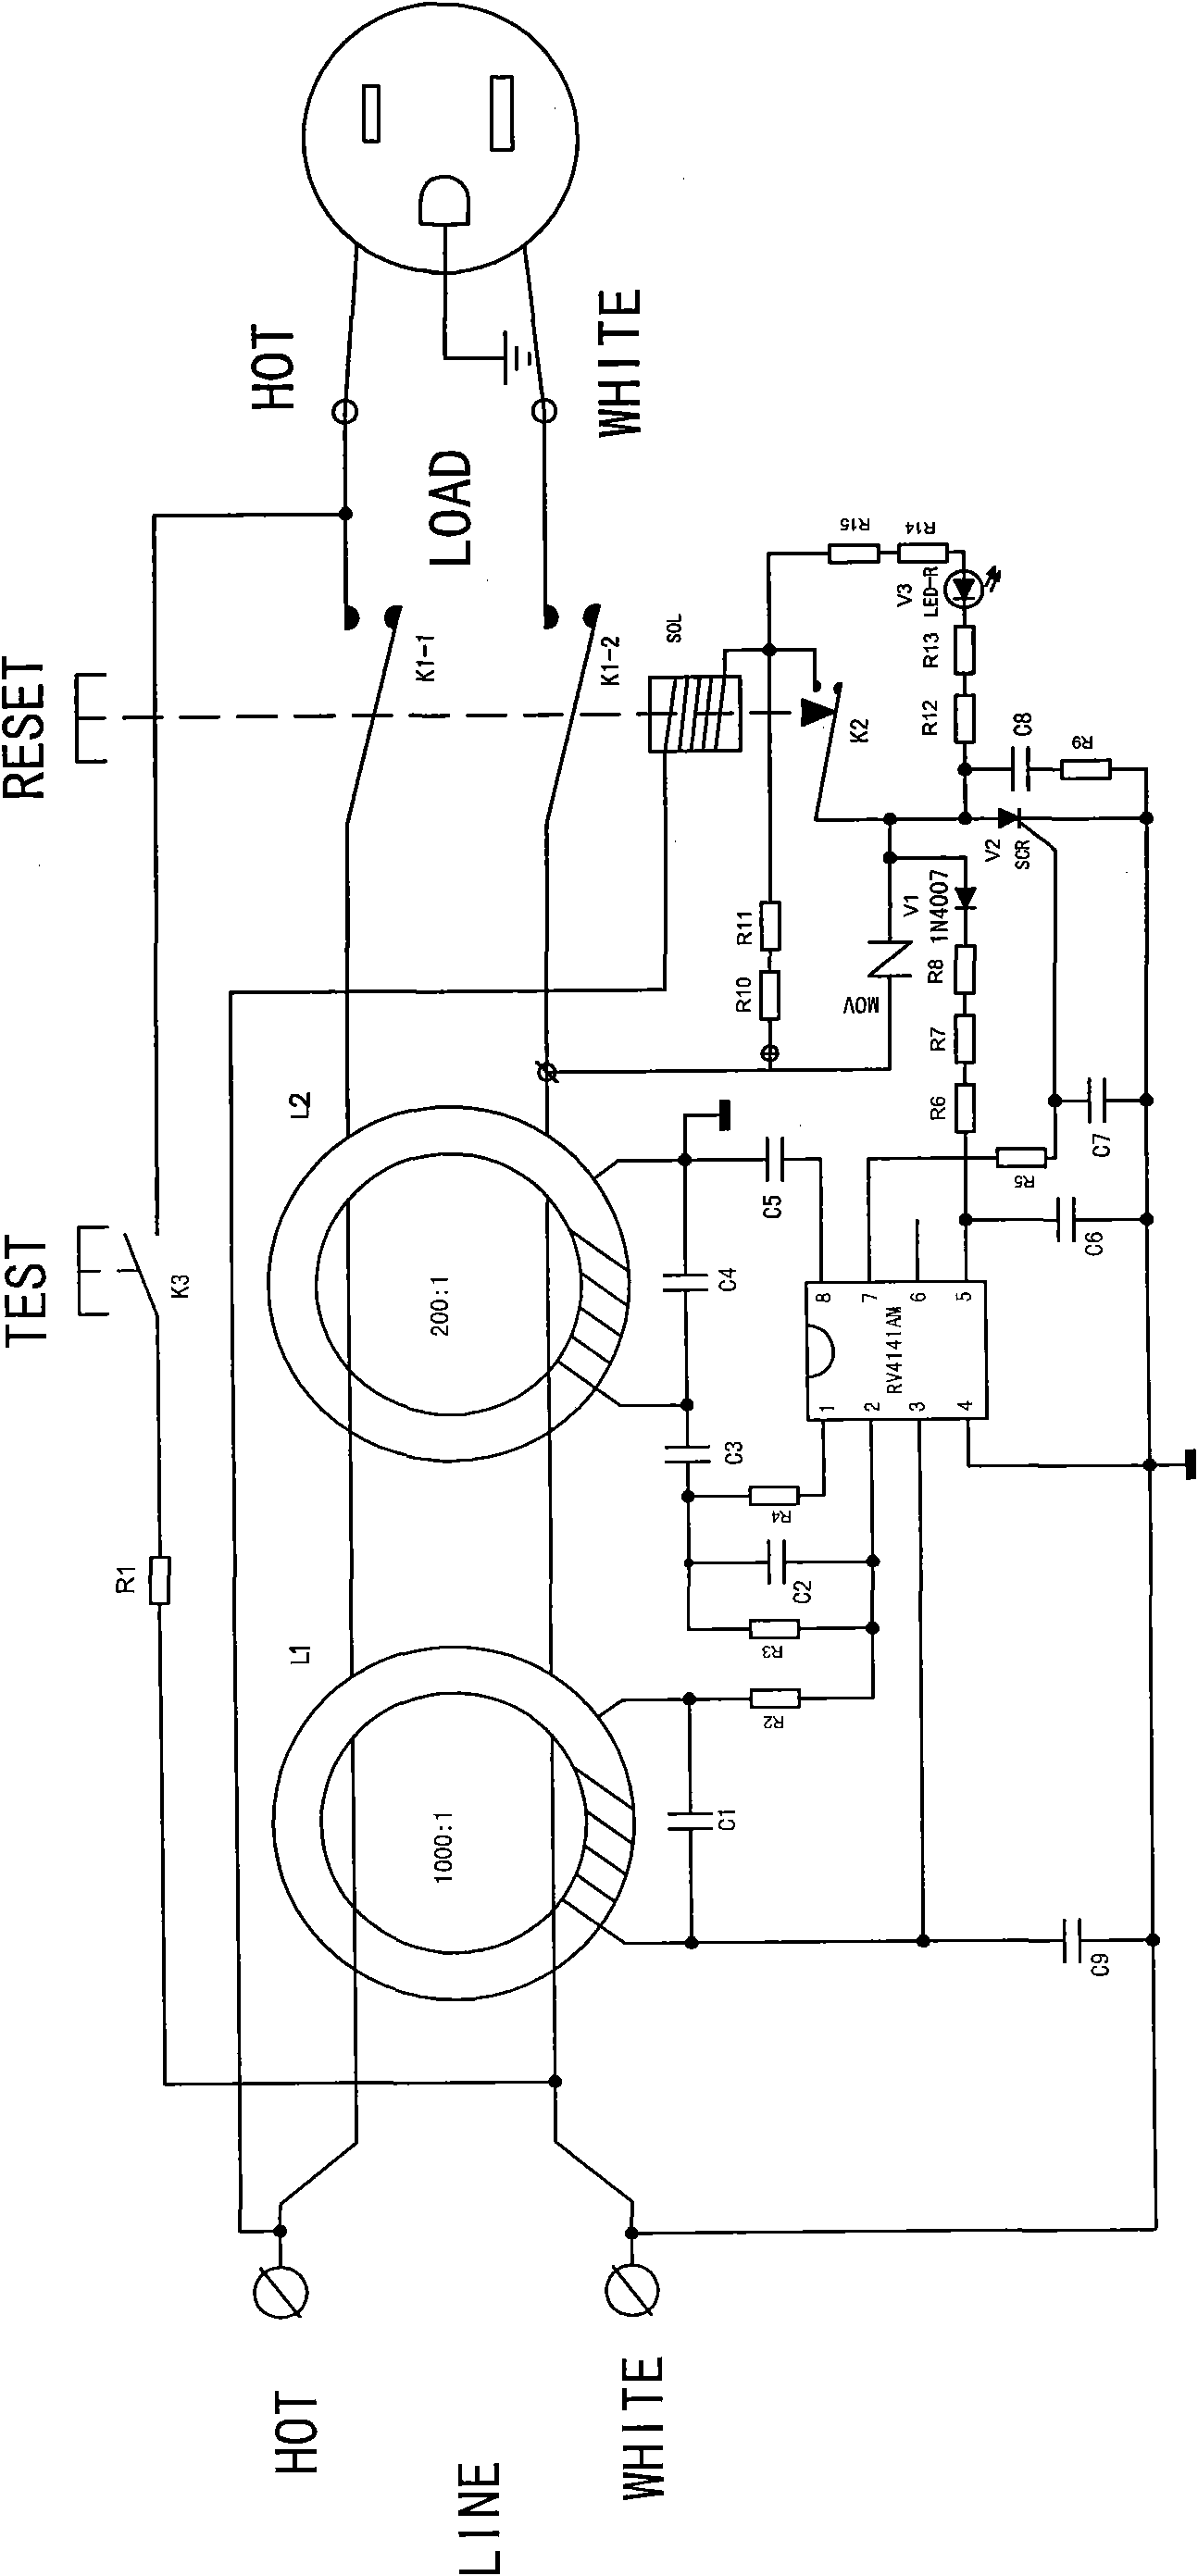 Electric leakage detection and protection circuit